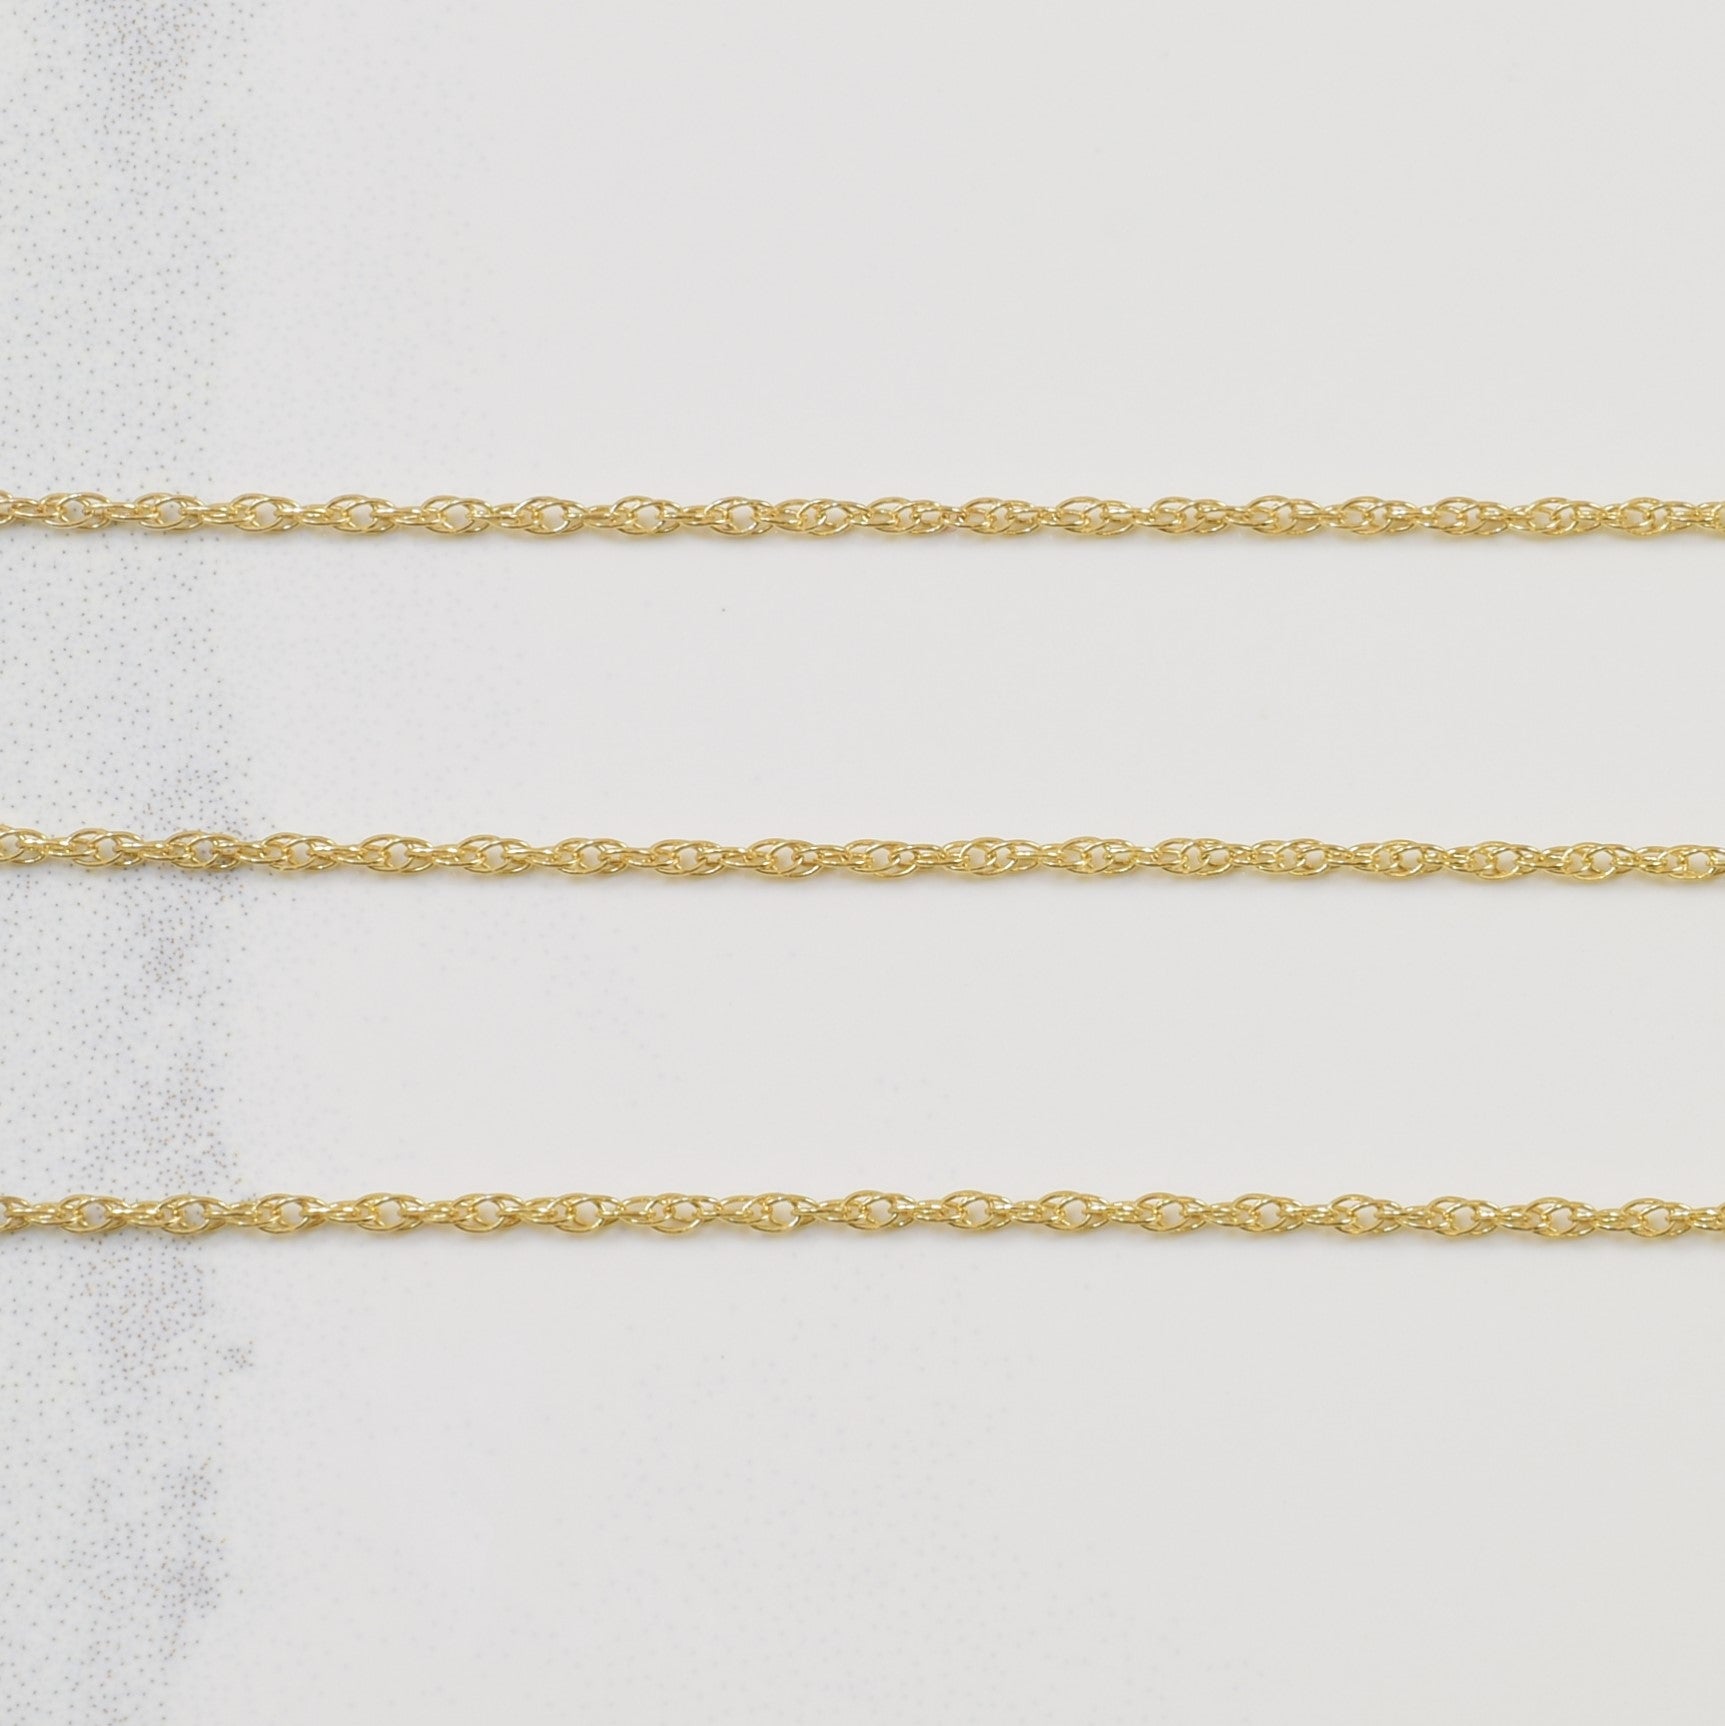 10k Yellow Gold Prince of Wales Chain | 18